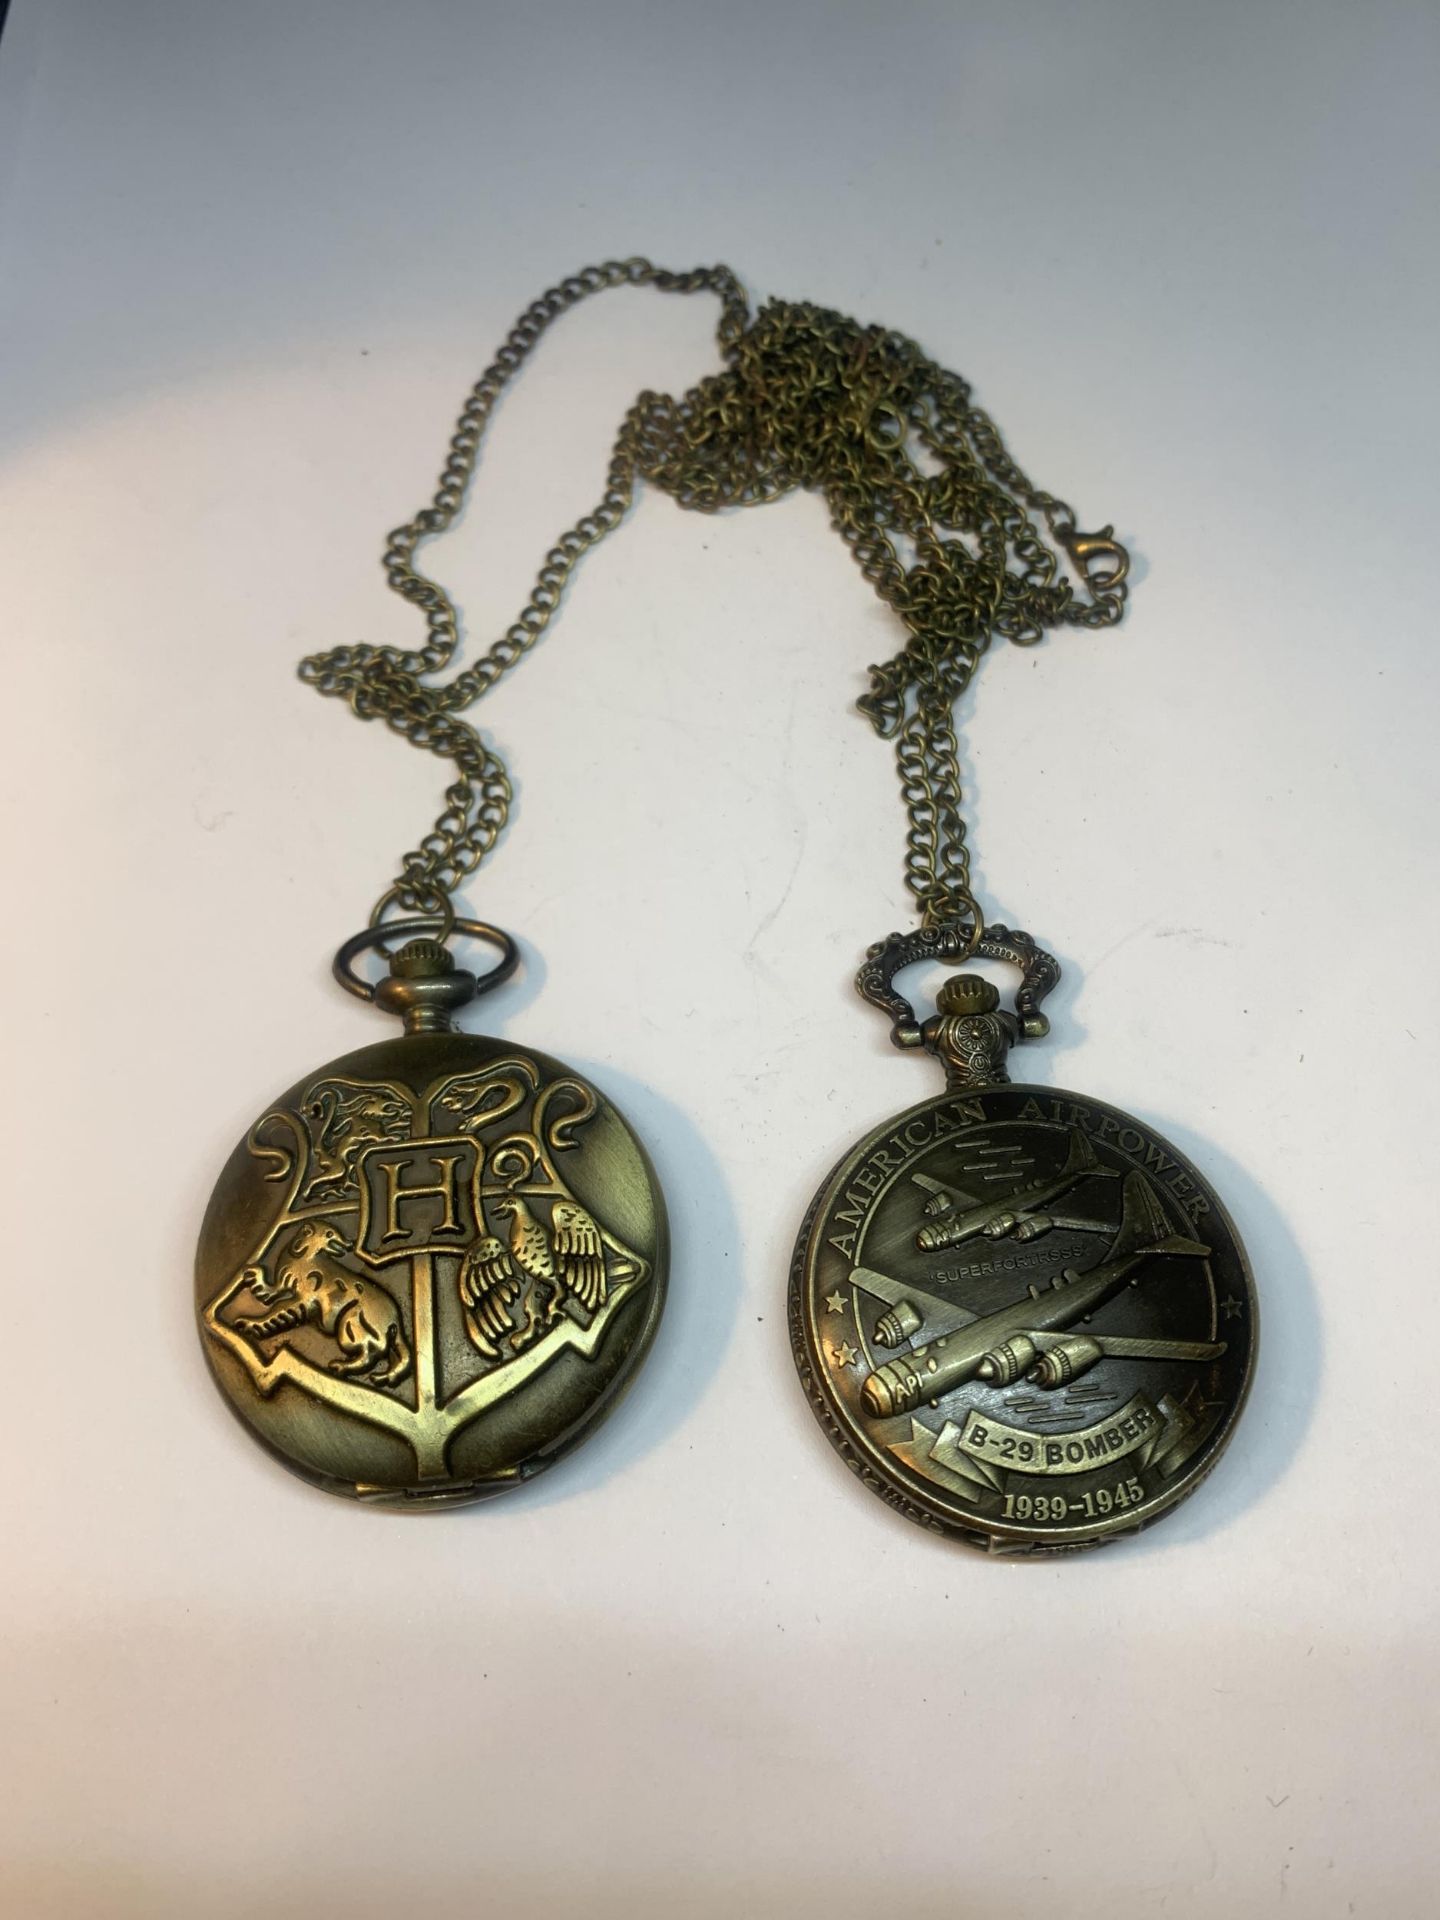 TWO POCKET WATCHES WITH IMAGES OF USA BOMBER AND A COAT OF ARMS